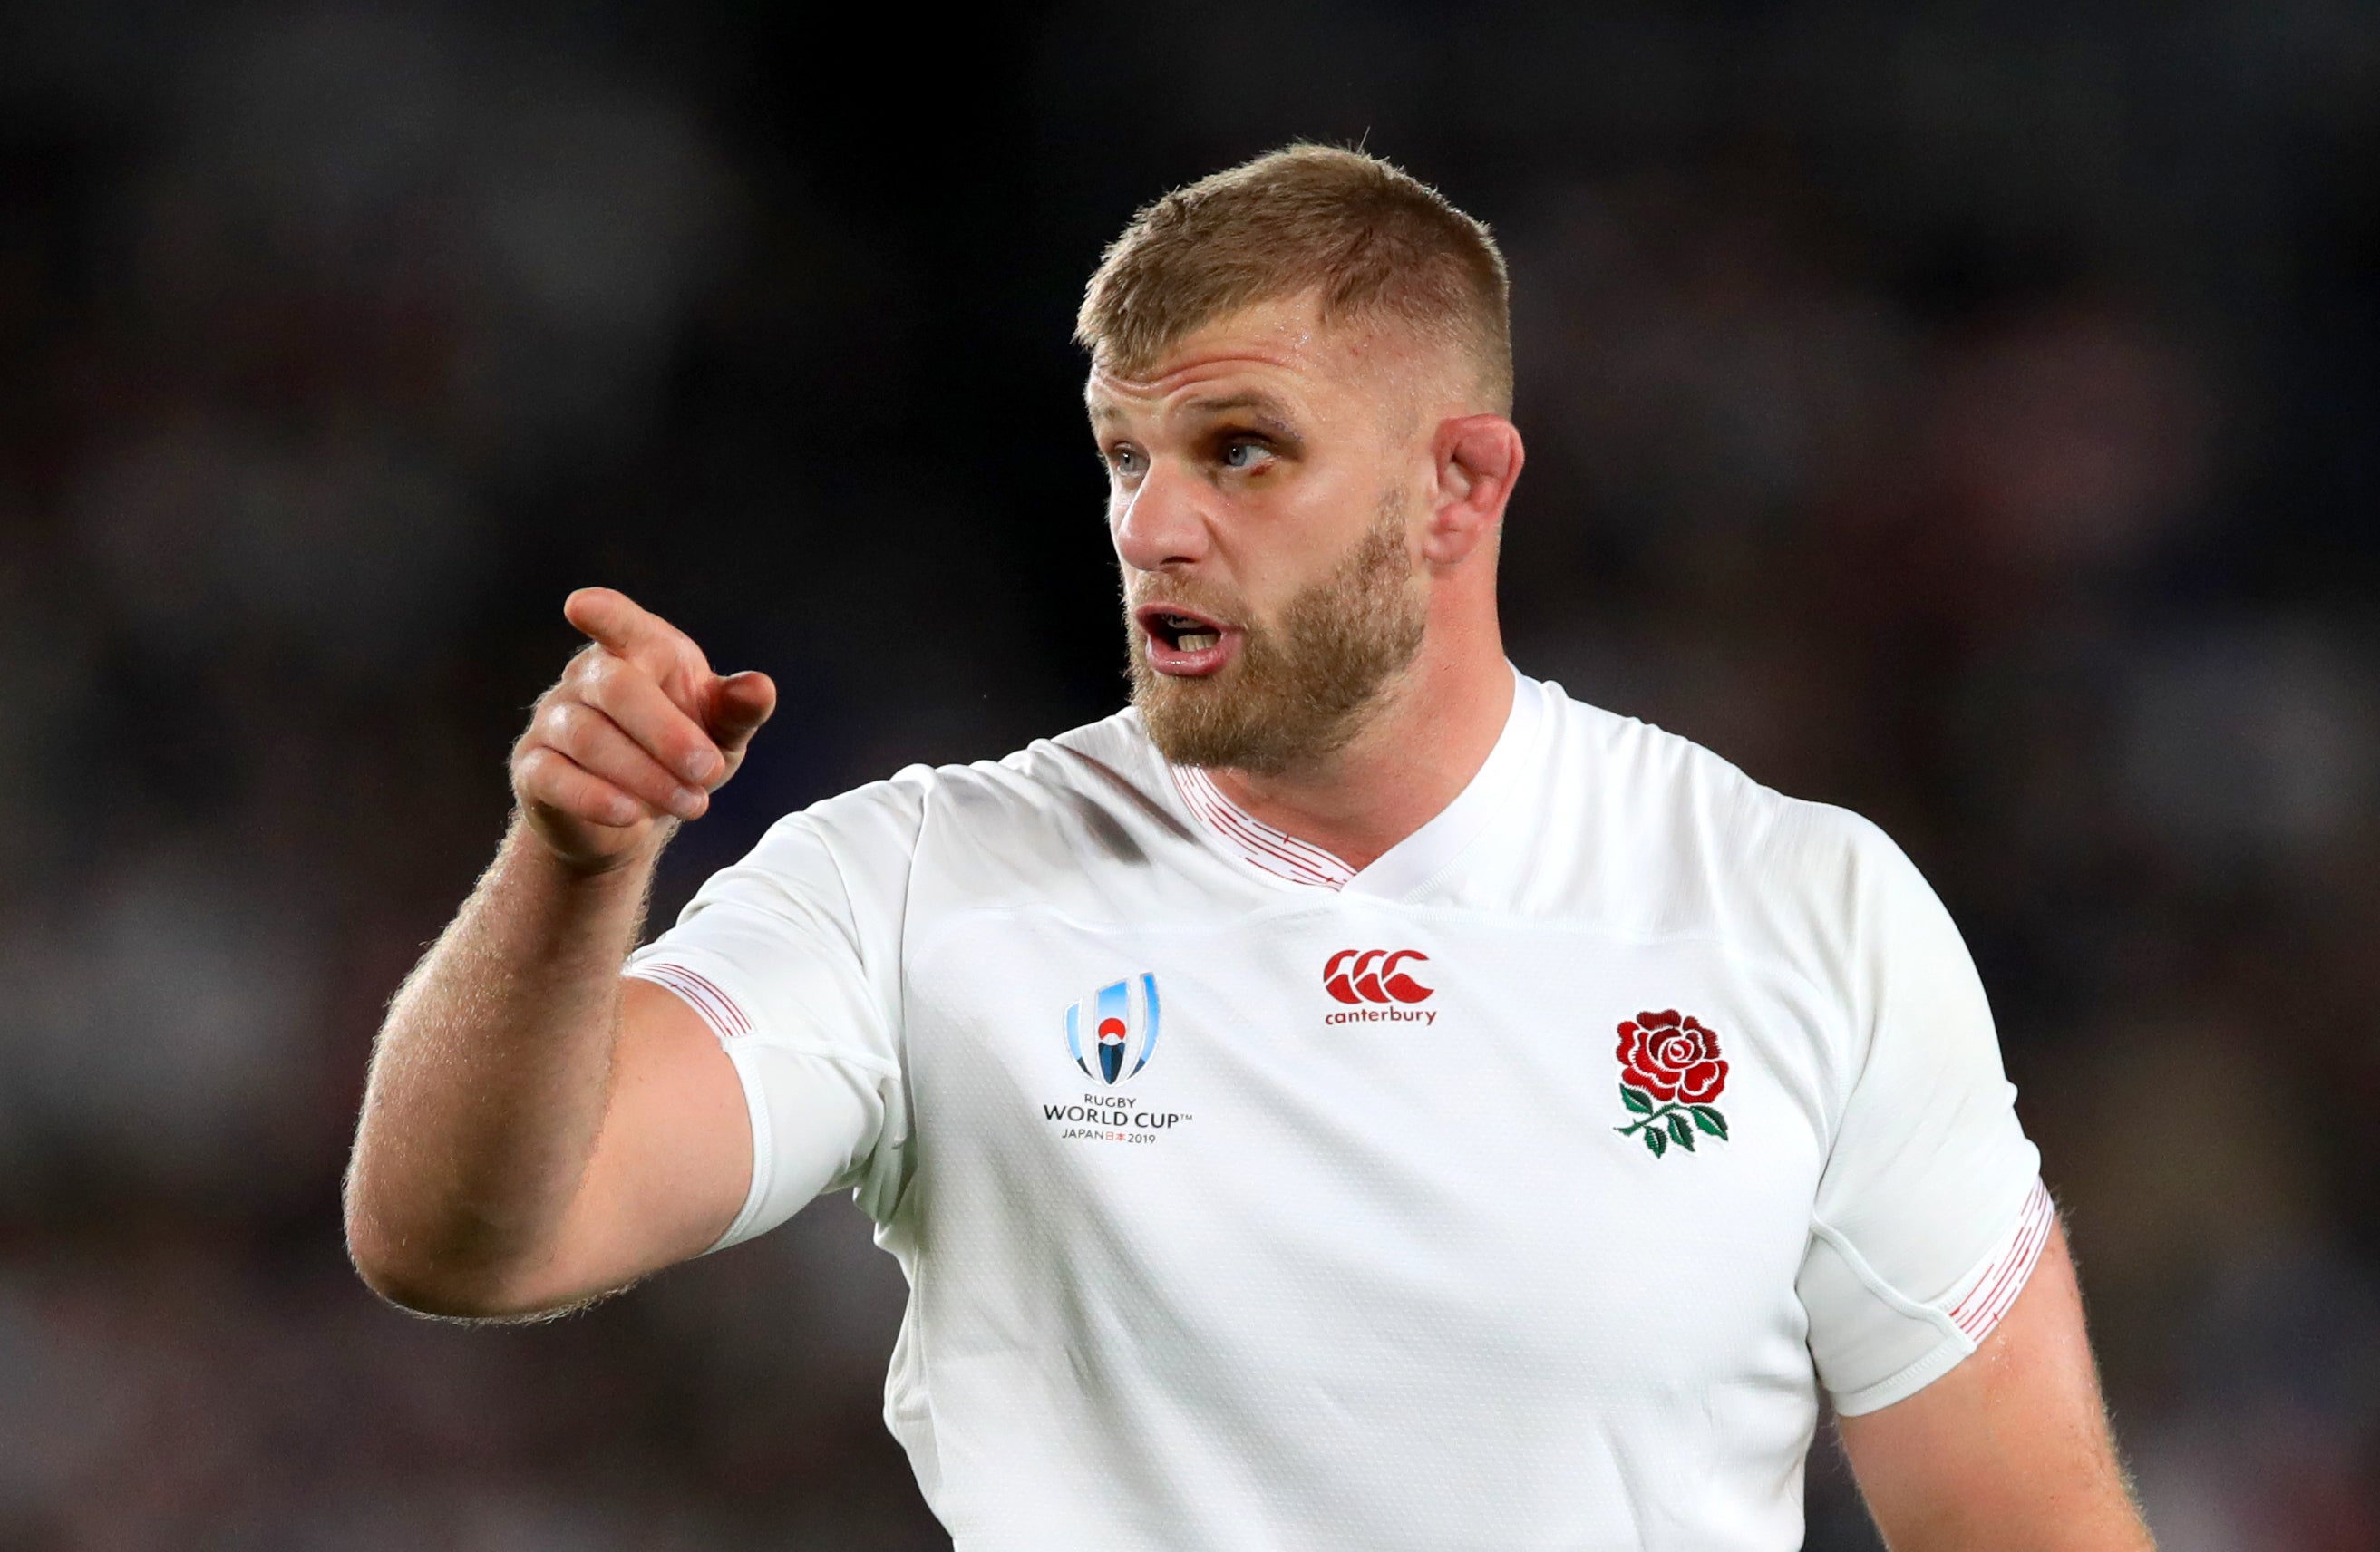 Former England lock George Kruis will retire after playing for the Barbarians at Twickenham this weekend (Adam Davy/PA)